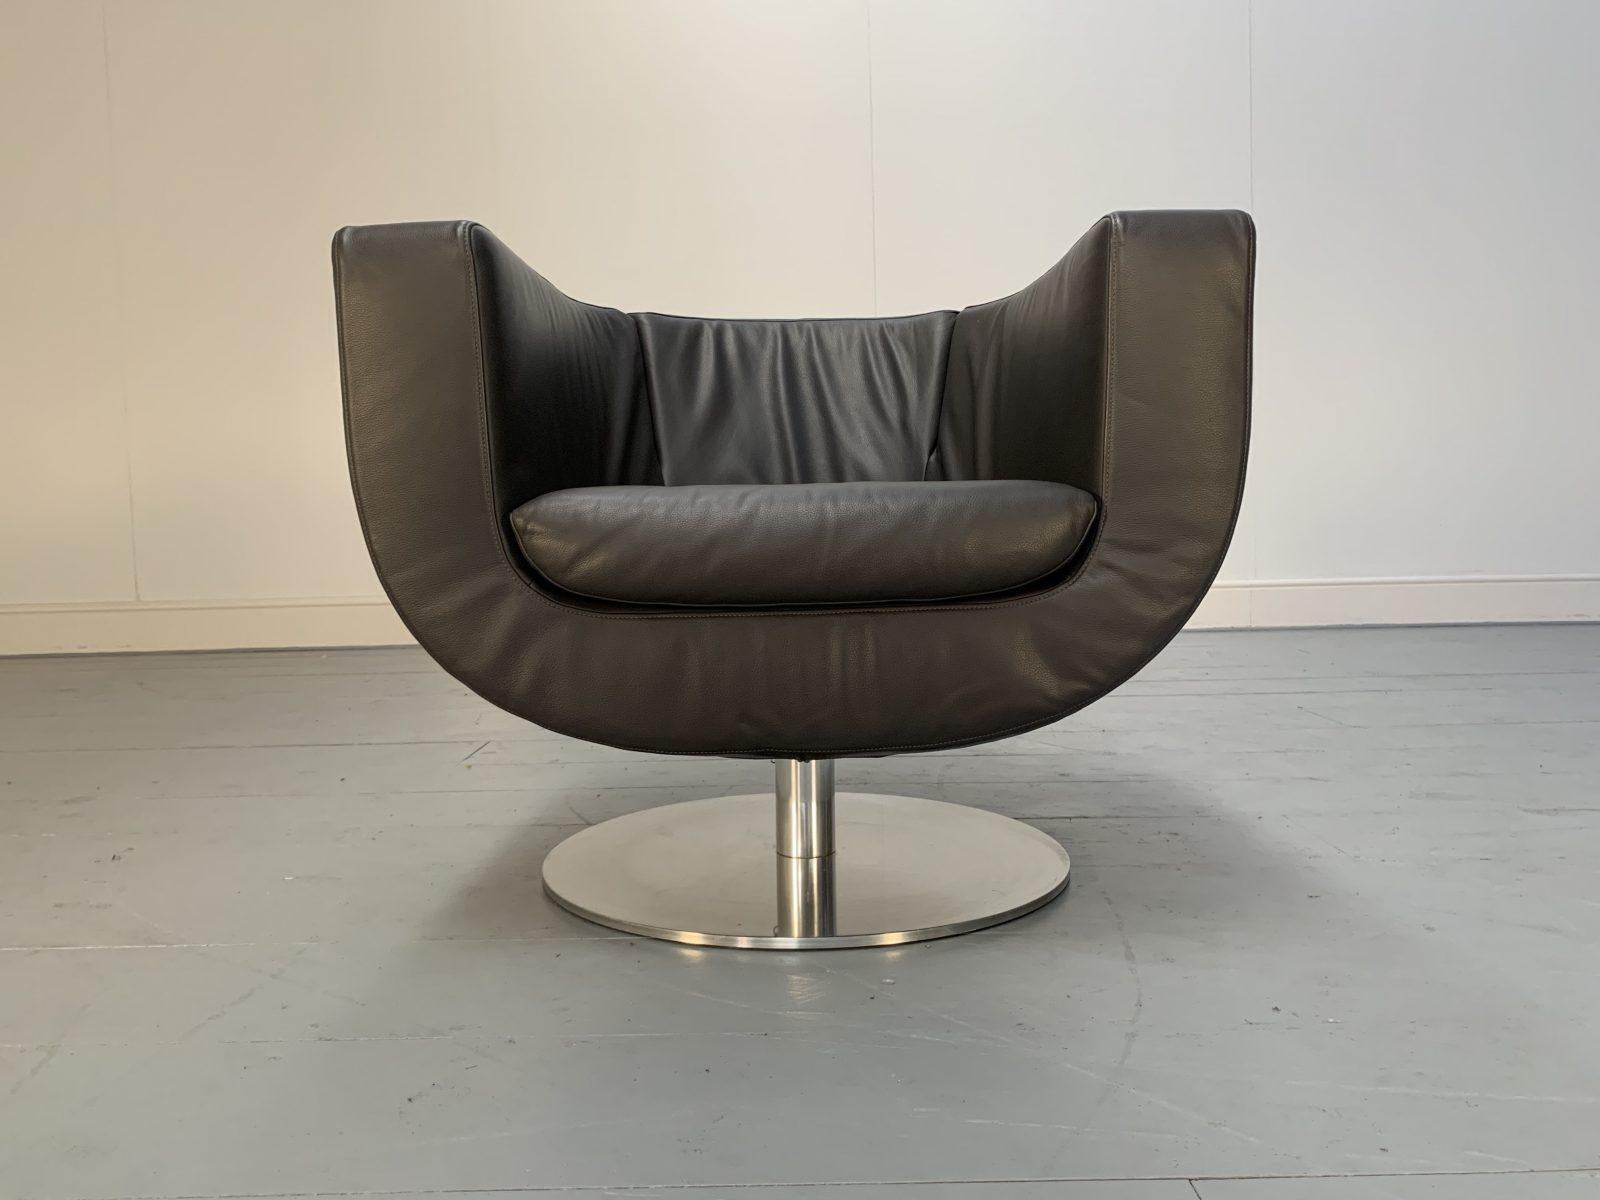 Hello Friends, and welcome to another unmissable offering from Lord Browns Furniture, the UK’s premier resource for fine Sofas and Chairs.

On offer on this occasion is a superb B&B Italia “Tulip” Armchair (one of 2 identical Armchairs available